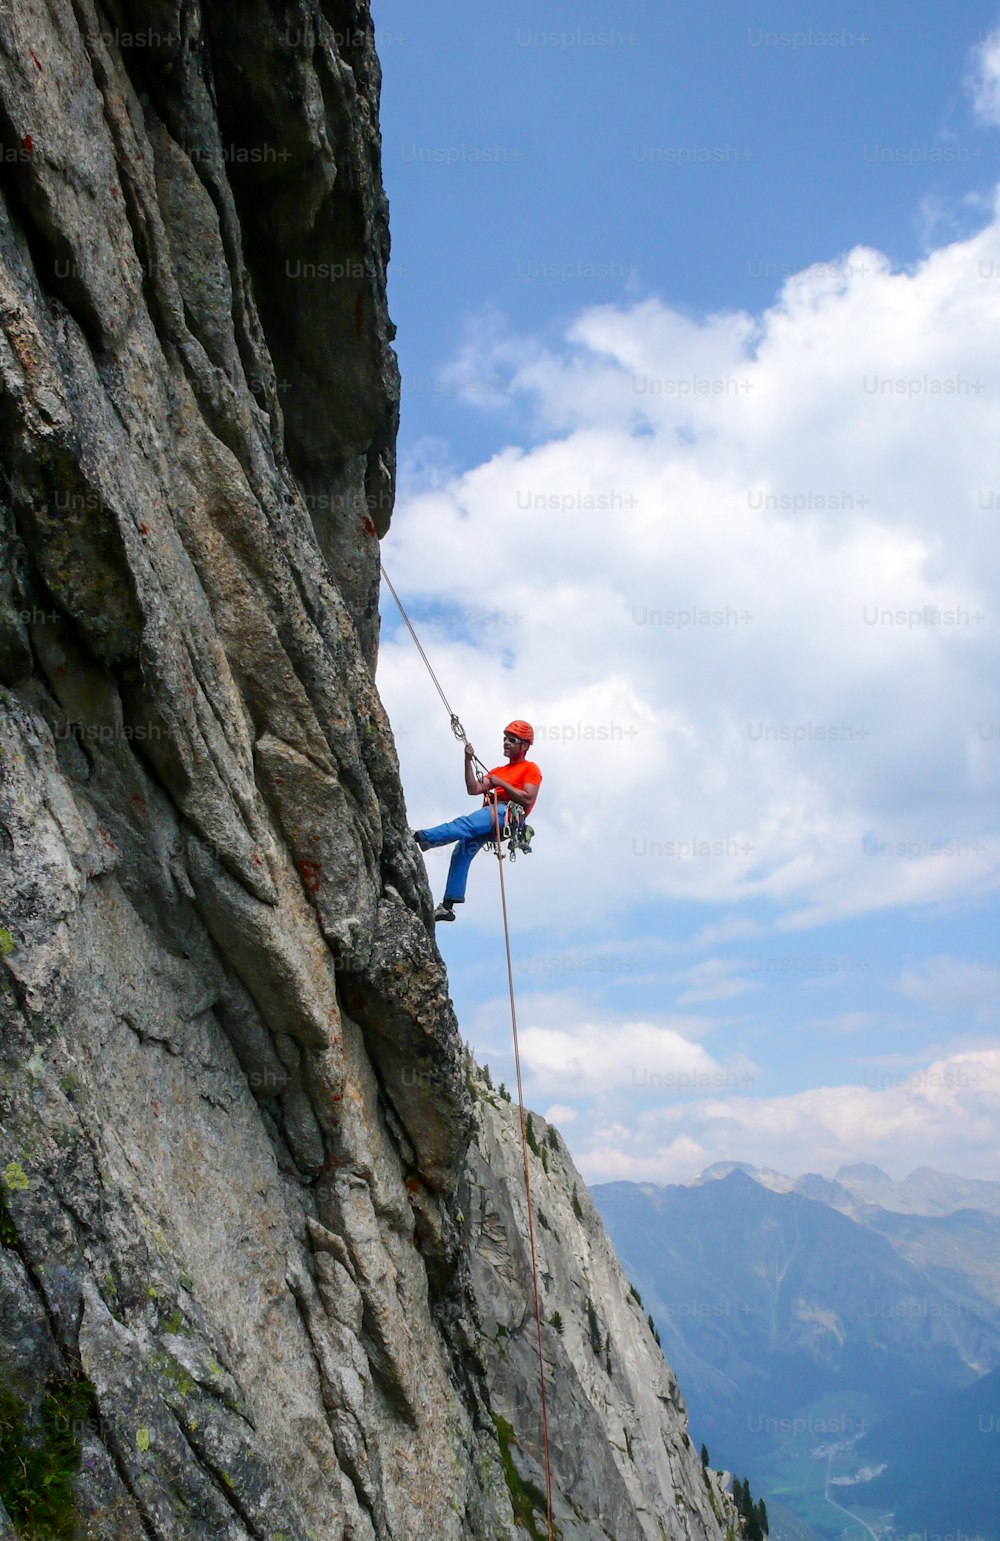 A male rock climber abseiling off a steep rock climbing route in the Swiss Alps after a hard climb